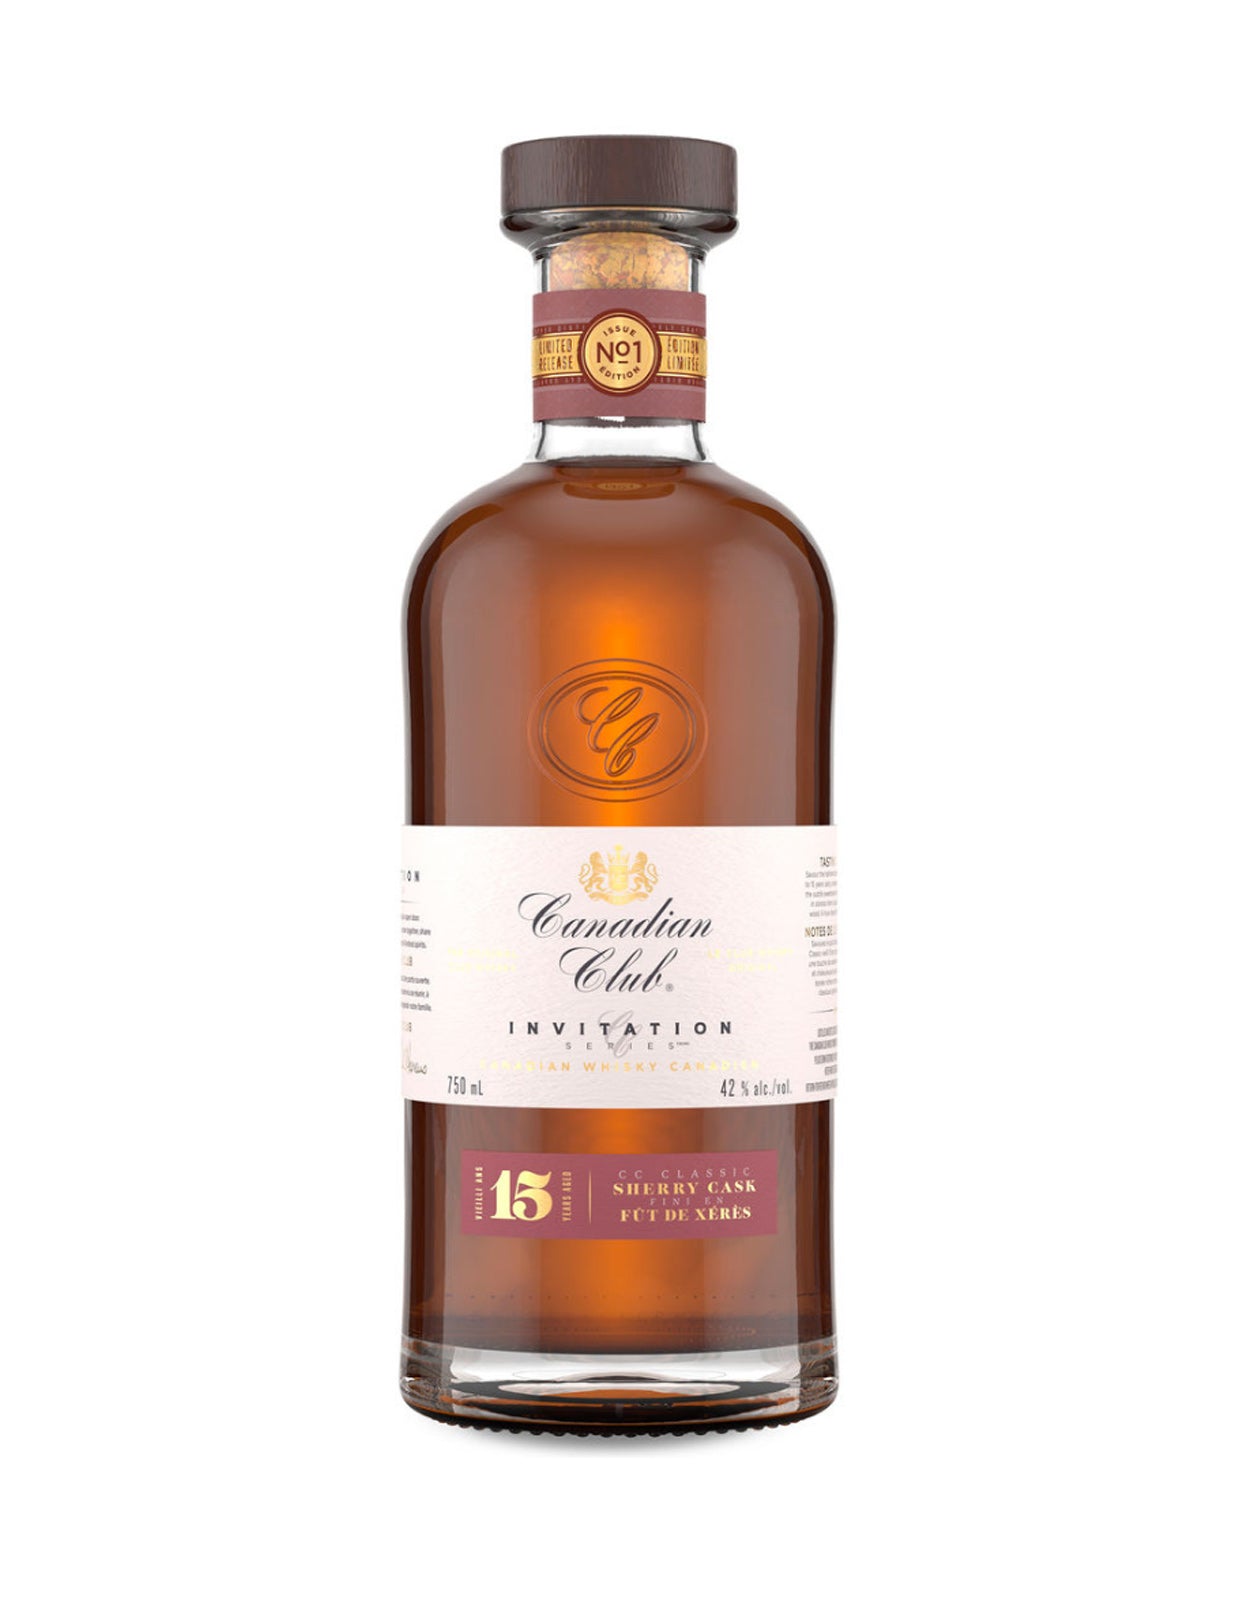 Canadian Club Invitation Classic 15 Year Old Sherry Cask